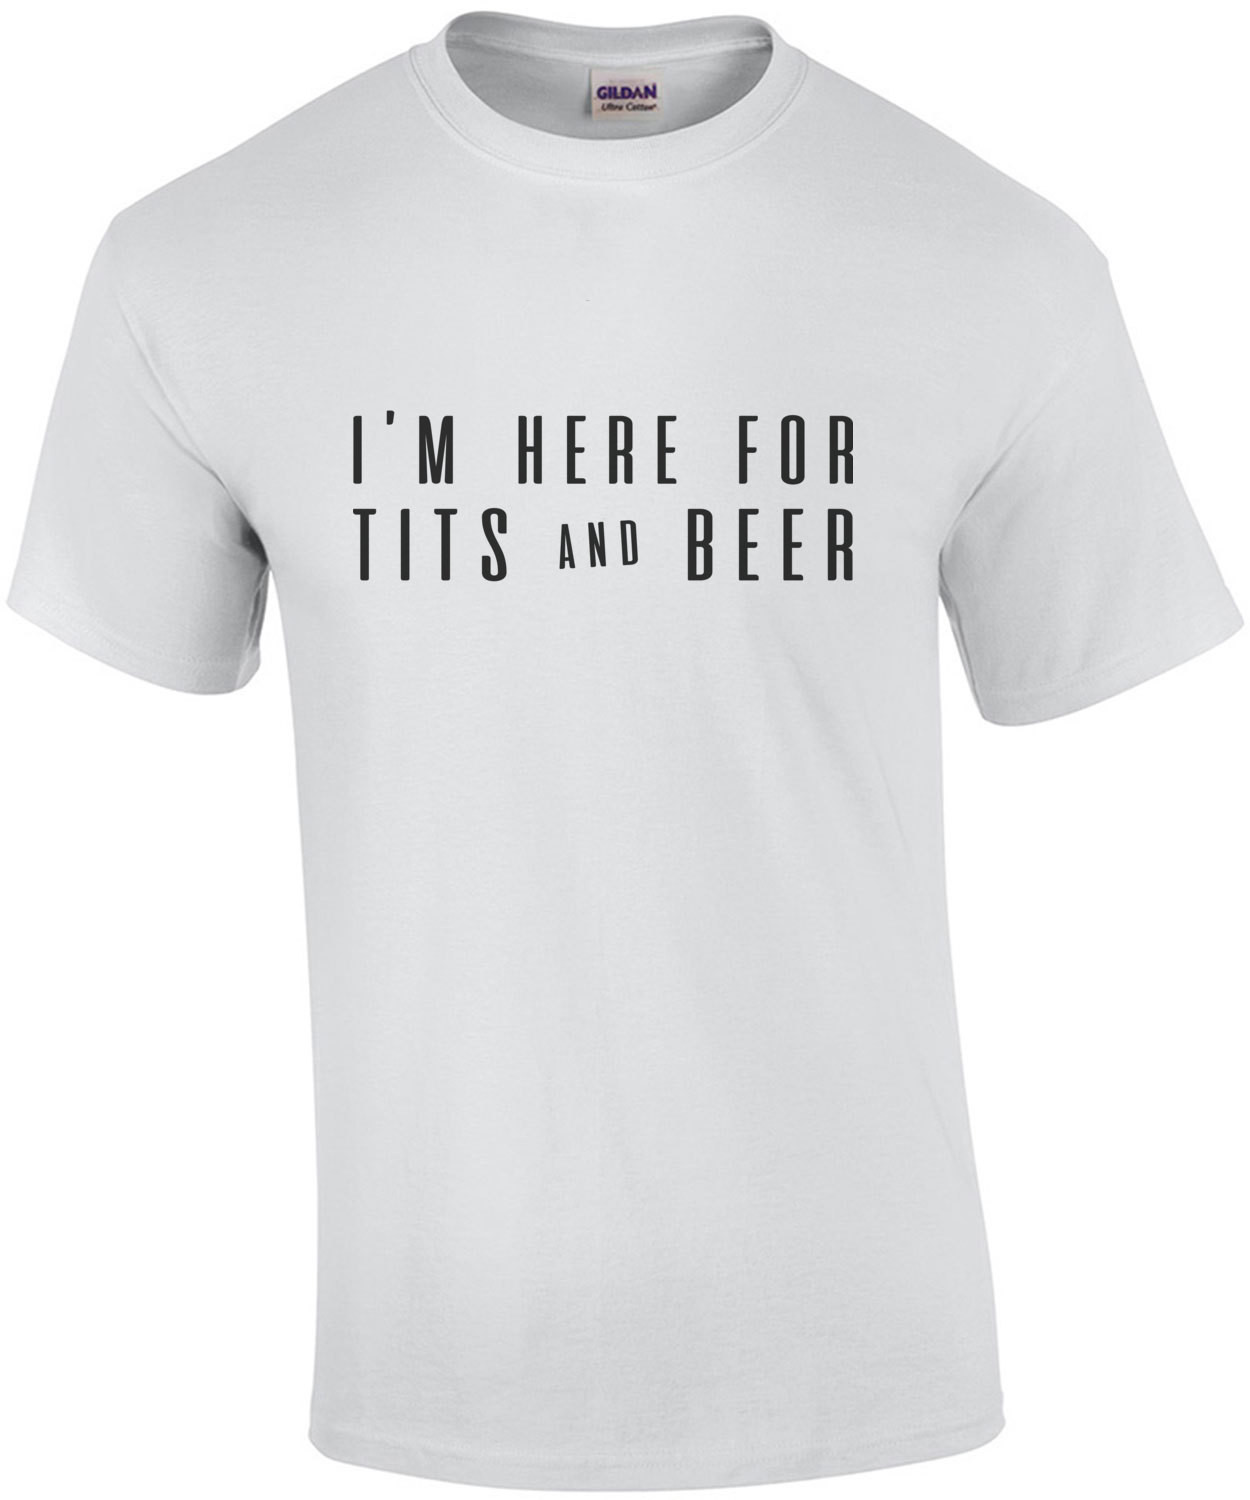 I'm here for tits and beer - funny t-shirt